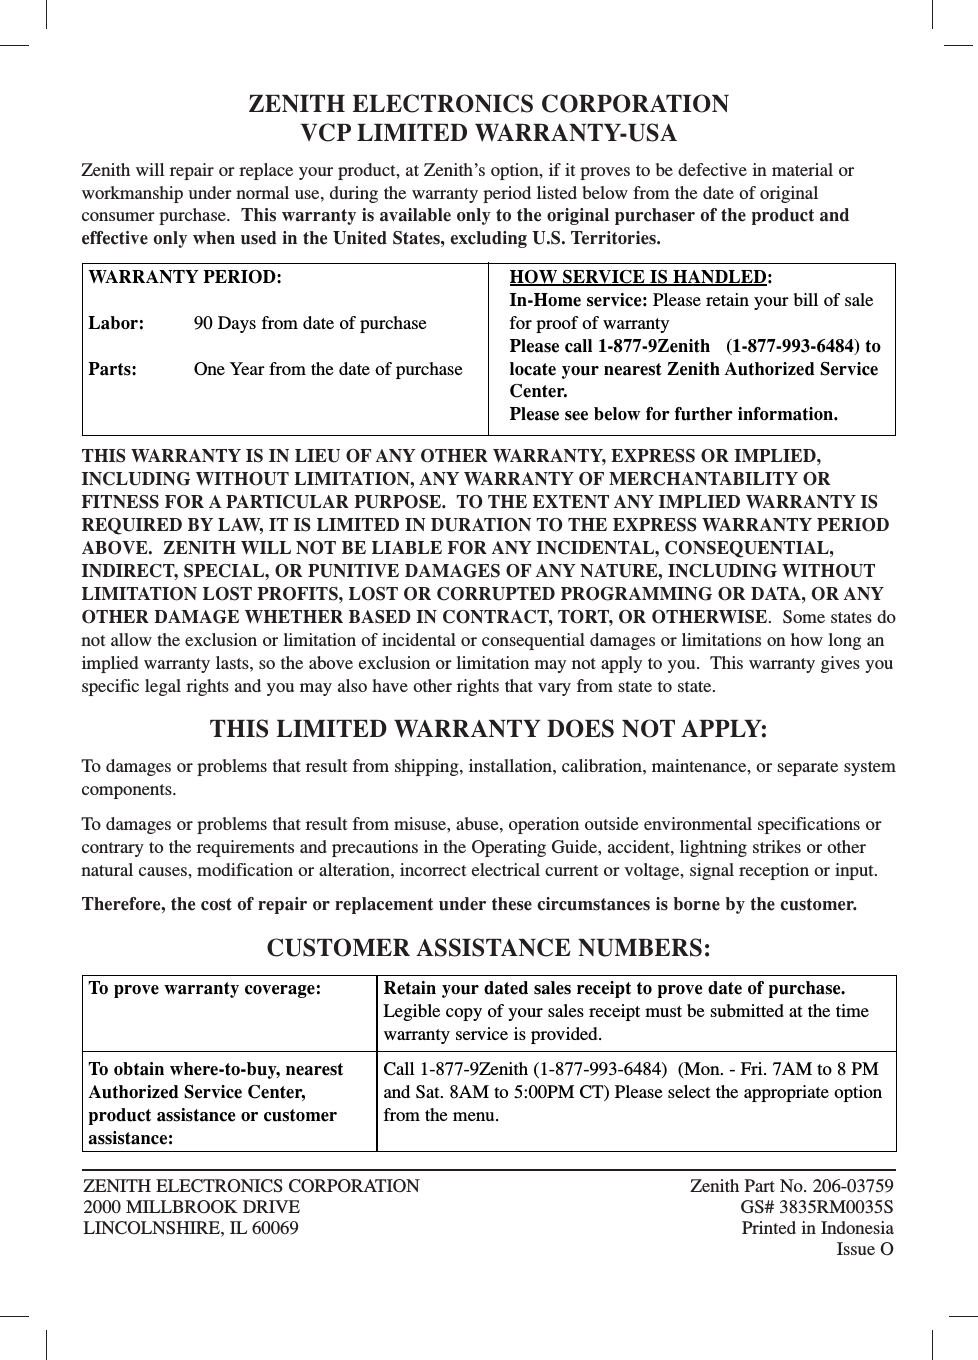 ZENITH ELECTRONICS CORPORATIONVCP LIMITED WARRANTY-USAZenith will repair or replace your product, at Zenith’s option, if it proves to be defective in material orworkmanship under normal use, during the warranty period listed below from the date of original consumer purchase.  This warranty is available only to the original purchaser of the product andeffective only when used in the United States, excluding U.S. Territories.THIS WARRANTY IS IN LIEU OF ANY OTHER WARRANTY, EXPRESS OR IMPLIED,INCLUDING WITHOUT LIMITATION, ANY WARRANTY OF MERCHANTABILITY OR FITNESS FOR A PARTICULAR PURPOSE.  TO THE EXTENT ANY IMPLIED WARRANTY ISREQUIRED BY LAW, IT IS LIMITED IN DURATION TO THE EXPRESS WARRANTY PERIODABOVE.  ZENITH WILL NOT BE LIABLE FOR ANY INCIDENTAL, CONSEQUENTIAL, INDIRECT, SPECIAL, OR PUNITIVE DAMAGES OF ANY NATURE, INCLUDING WITHOUTLIMITATION LOST PROFITS, LOST OR CORRUPTED PROGRAMMING OR DATA, OR ANYOTHER DAMAGE WHETHER BASED IN CONTRACT, TORT, OR OTHERWISE.  Some states donot allow the exclusion or limitation of incidental or consequential damages or limitations on how long animplied warranty lasts, so the above exclusion or limitation may not apply to you.  This warranty gives youspecific legal rights and you may also have other rights that vary from state to state.THIS LIMITED WARRANTY DOES NOT APPLY:To damages or problems that result from shipping, installation, calibration, maintenance, or separate systemcomponents.To damages or problems that result from misuse, abuse, operation outside environmental specifications orcontrary to the requirements and precautions in the Operating Guide, accident, lightning strikes or othernatural causes, modification or alteration, incorrect electrical current or voltage, signal reception or input.Therefore, the cost of repair or replacement under these circumstances is borne by the customer.CUSTOMER ASSISTANCE NUMBERS:ZENITH ELECTRONICS CORPORATION  Zenith Part No. 206-037592000 MILLBROOK DRIVE GS# 3835RM0035SLINCOLNSHIRE, IL 60069 Printed in IndonesiaIssue OWARRANTY PERIOD:Labor: 90 Days from date of purchaseParts: One Year from the date of purchaseHOW SERVICE IS HANDLED:In-Home service: Please retain your bill of salefor proof of warrantyPlease call 1-877-9Zenith   (1-877-993-6484) tolocate your nearest Zenith Authorized ServiceCenter.Please see below for further information.To  prove warranty coverage: To  obtain where-to-buy, nearestAuthorized Service Center, product assistance or customerassistance:Retain your dated sales receipt to prove date of purchase.Legible copy of your sales receipt must be submitted at the timewarranty service is provided.Call 1-877-9Zenith (1-877-993-6484)  (Mon. - Fri. 7AM to 8 PMand Sat. 8AM to 5:00PM CT) Please select the appropriate optionfrom the menu.